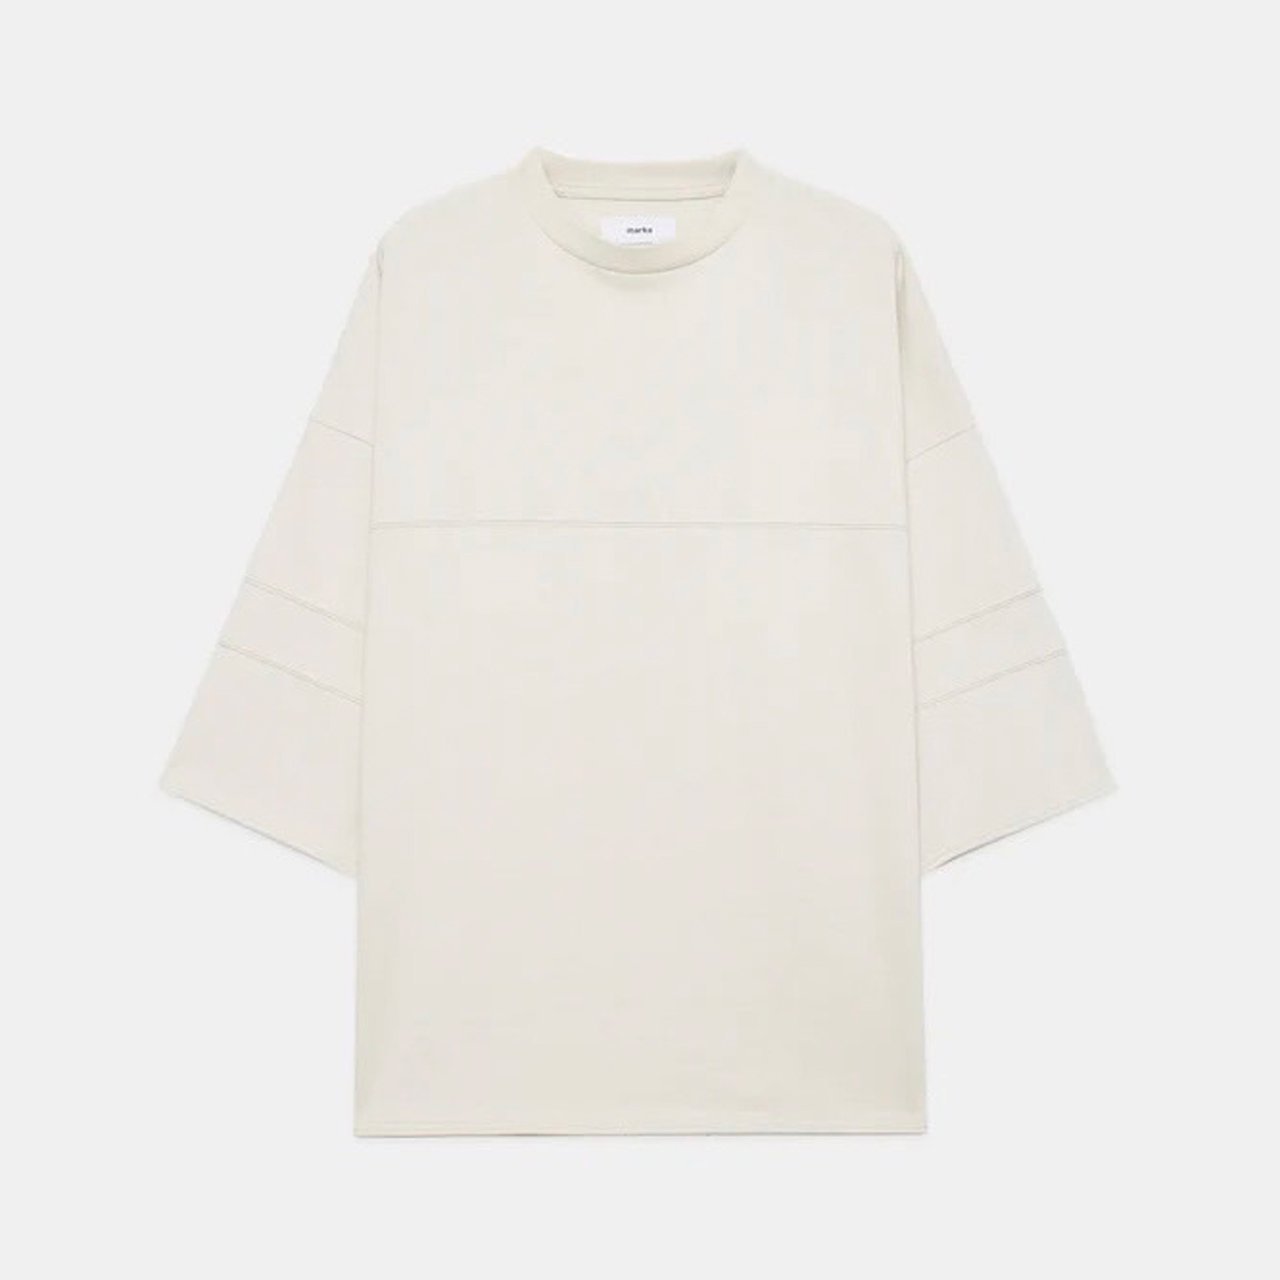 <img class='new_mark_img1' src='https://img.shop-pro.jp/img/new/icons5.gif' style='border:none;display:inline;margin:0px;padding:0px;width:auto;' />marka (ޡ)FOOTBALL TEE OFF WHITE -20//1 RECYCLE SUVIN ORGANIAC COTTON KNIT-